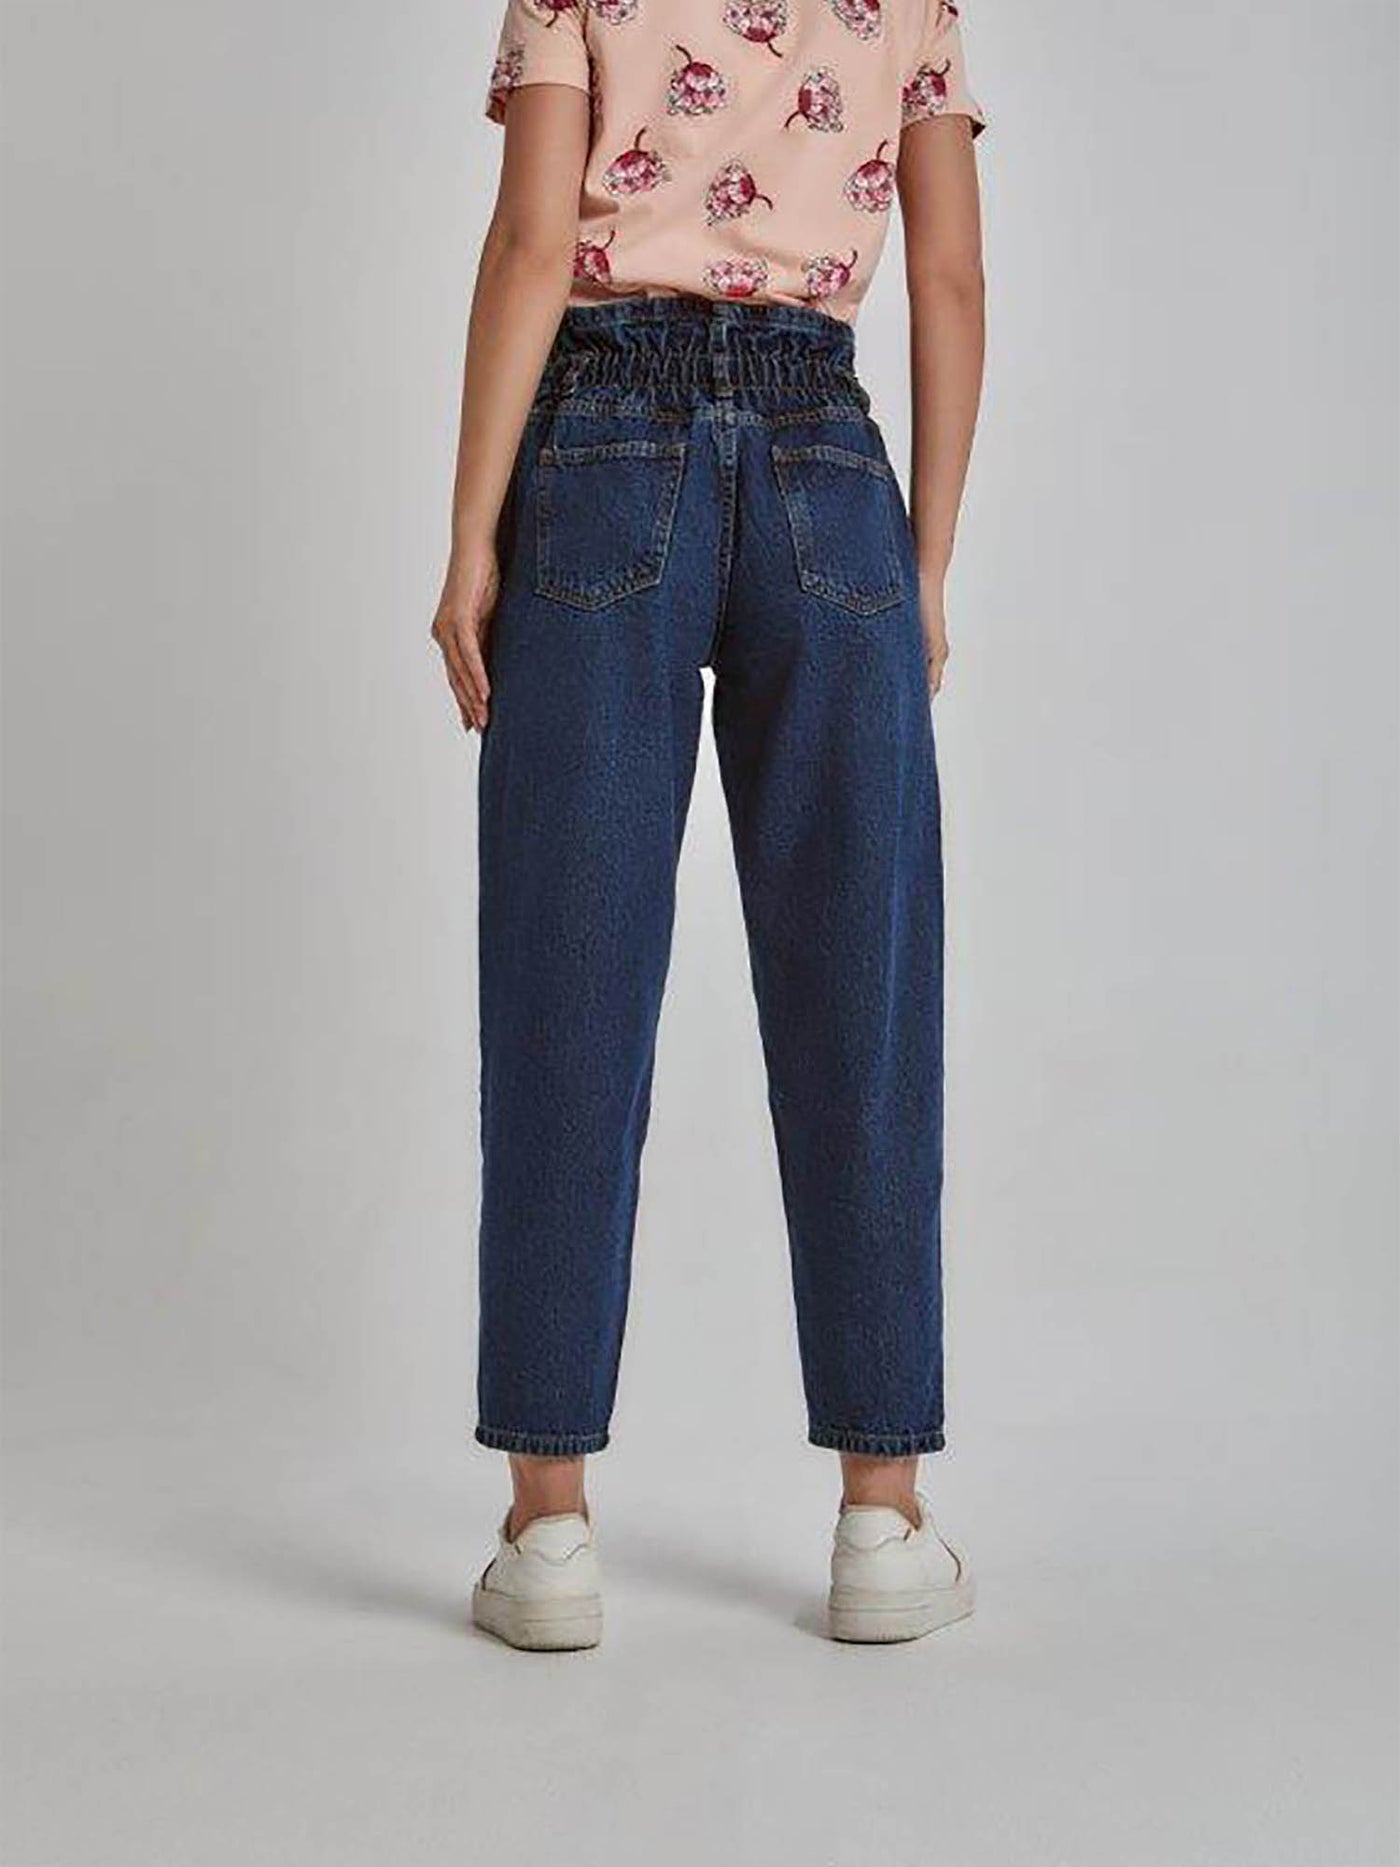 Jeans - Elasticated Waist - Buttoned